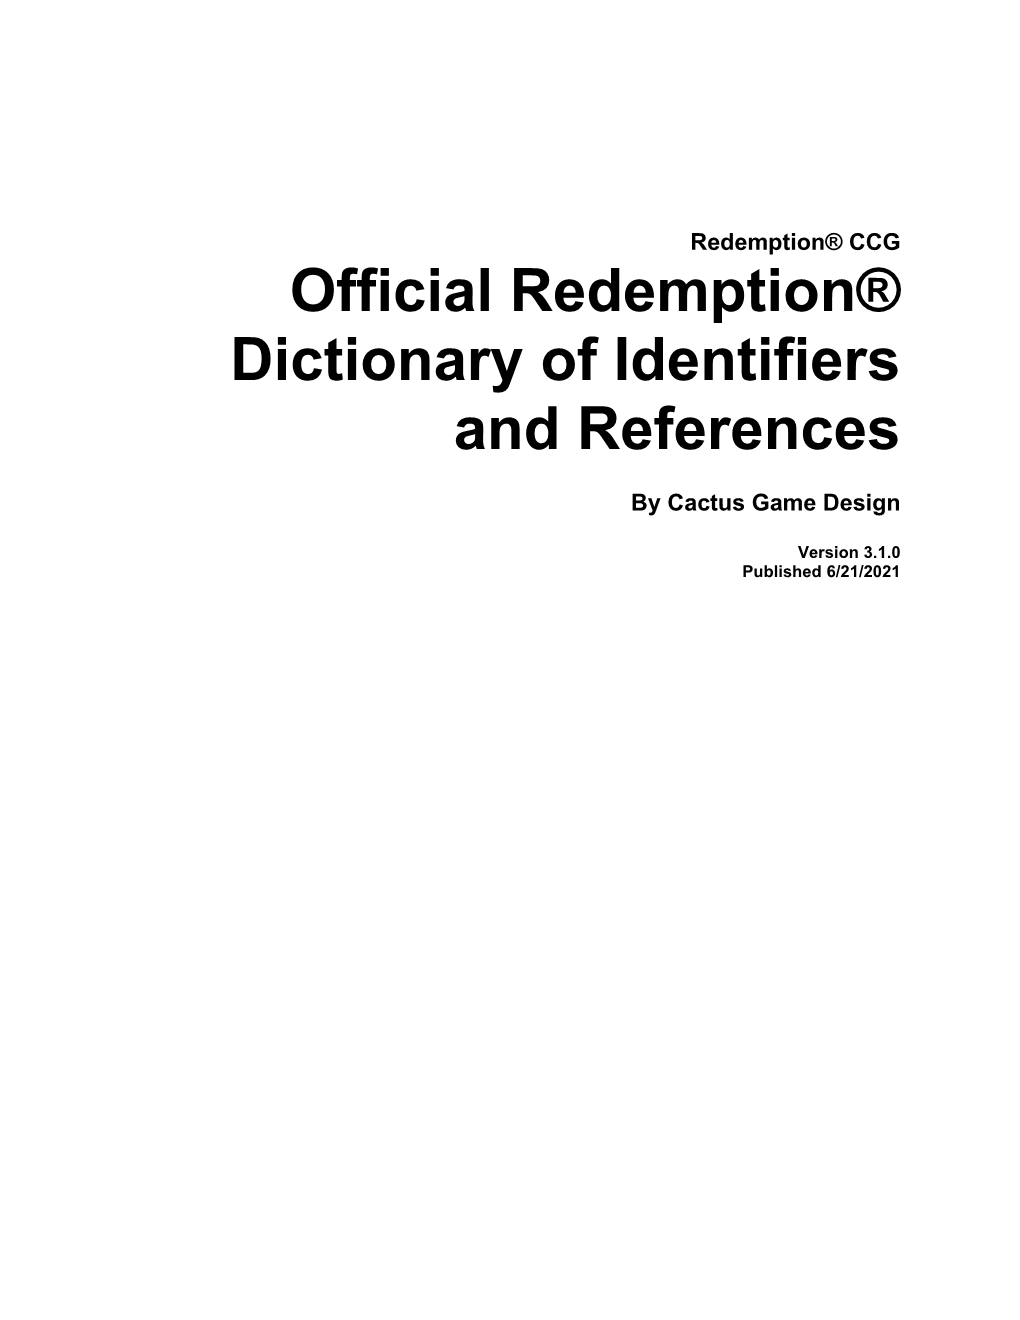 Redemption® Dictionary of Identifiers and References